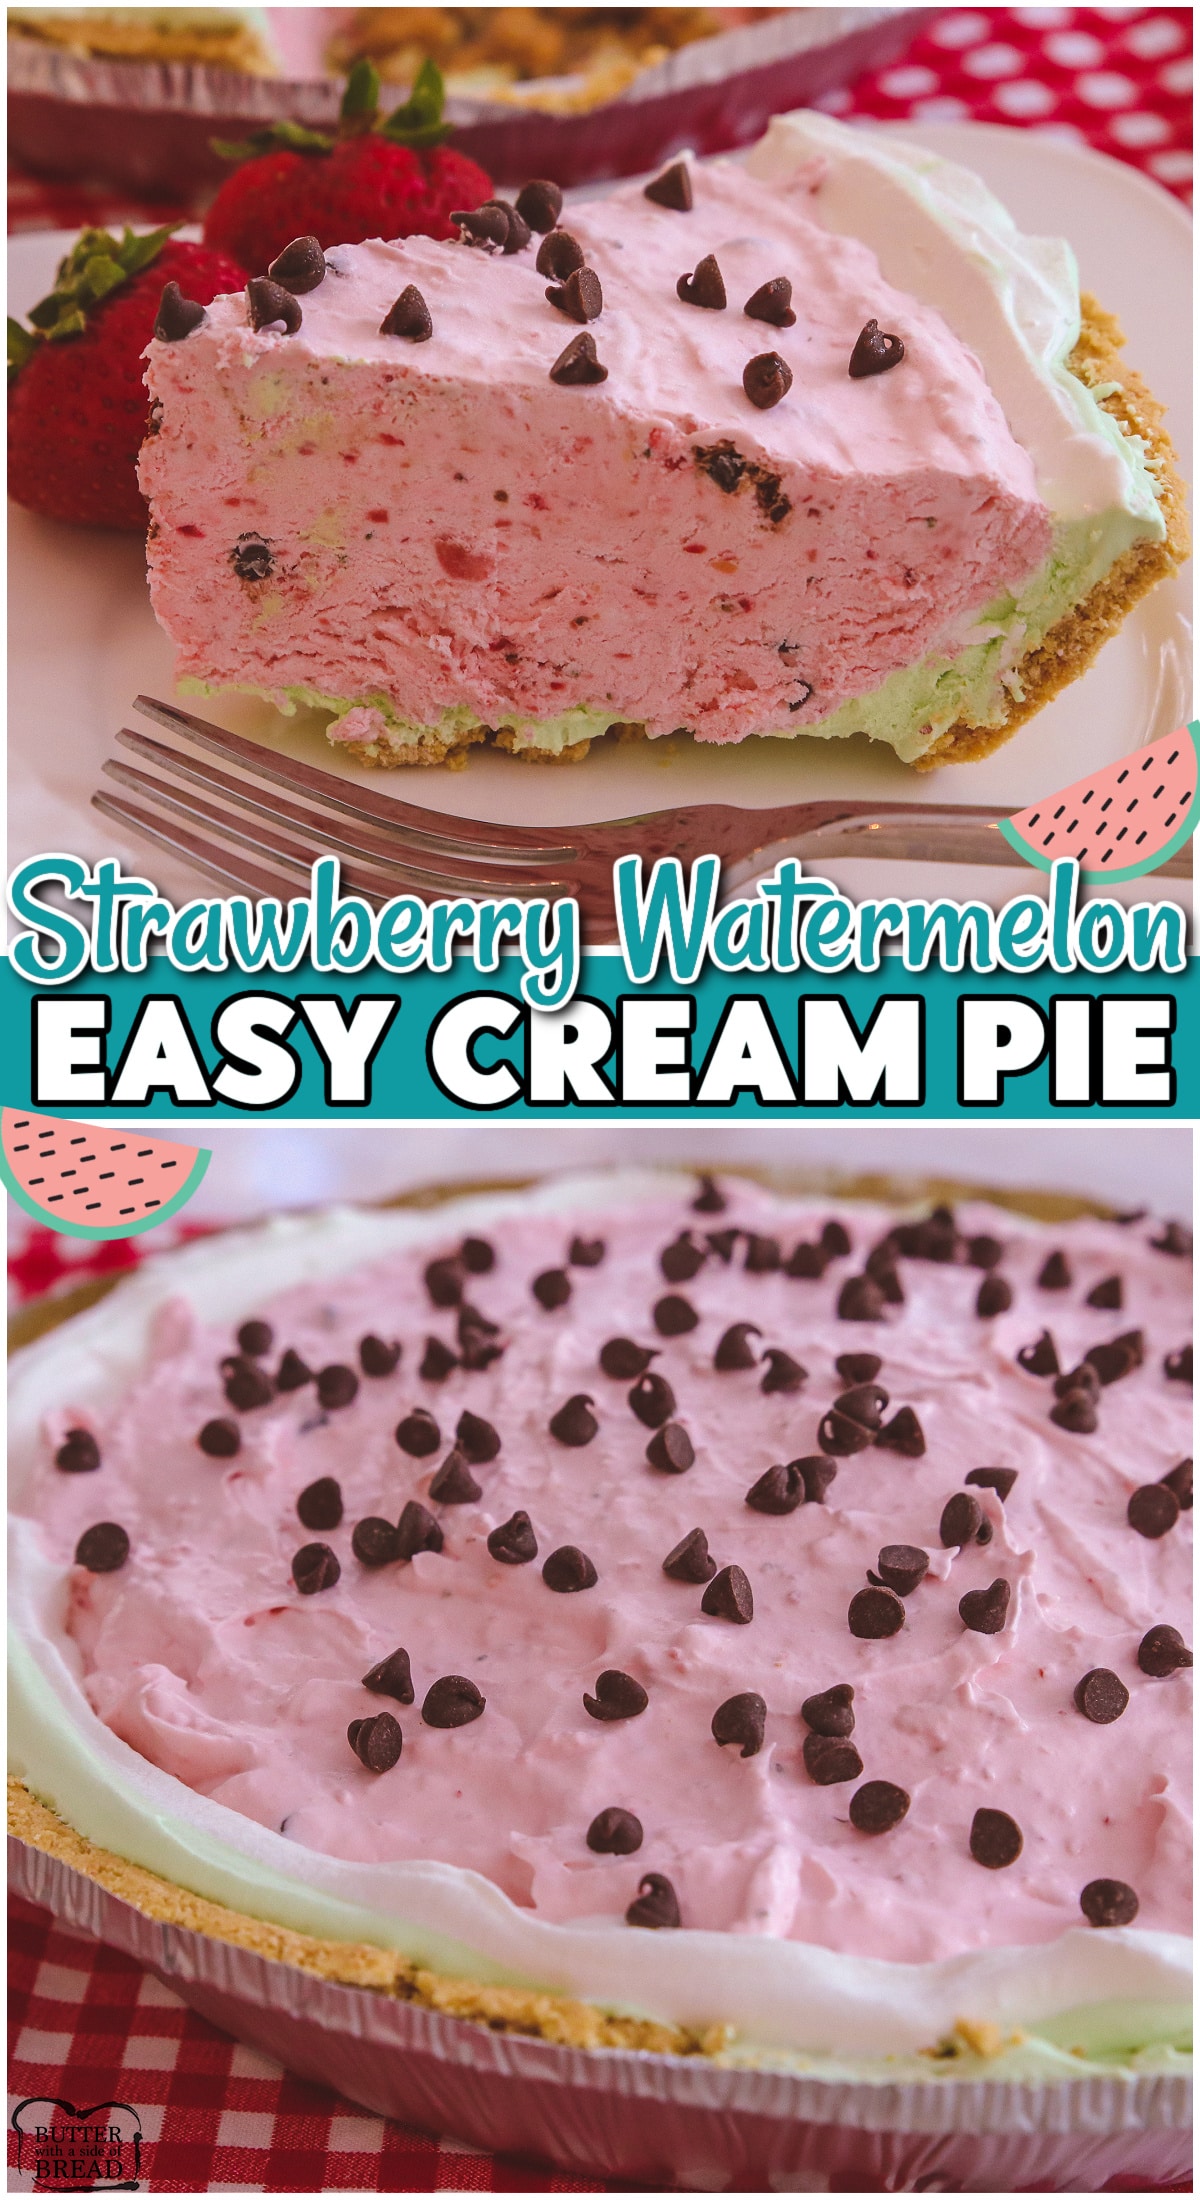 Strawberry Watermelon Cream Pie with fantastic fruit flavor & SUPER CUTE!! Delightful cream pie with chocolate chips that's perfect for summer BBQ's!